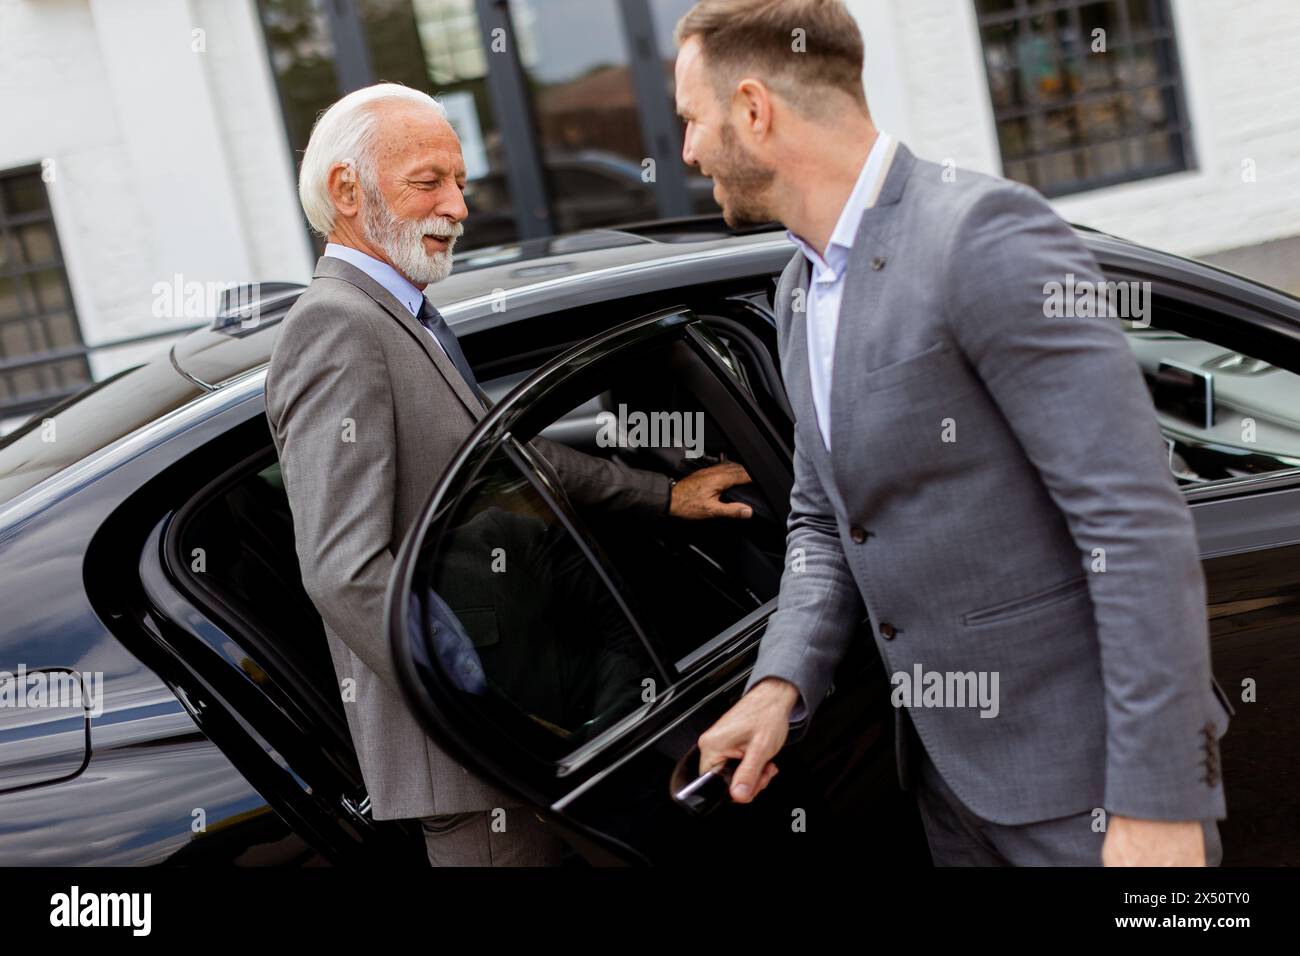 Well-dressed senior businessman is warmly greeted by his chauffeur as he approaches a sleek black car Stock Photo